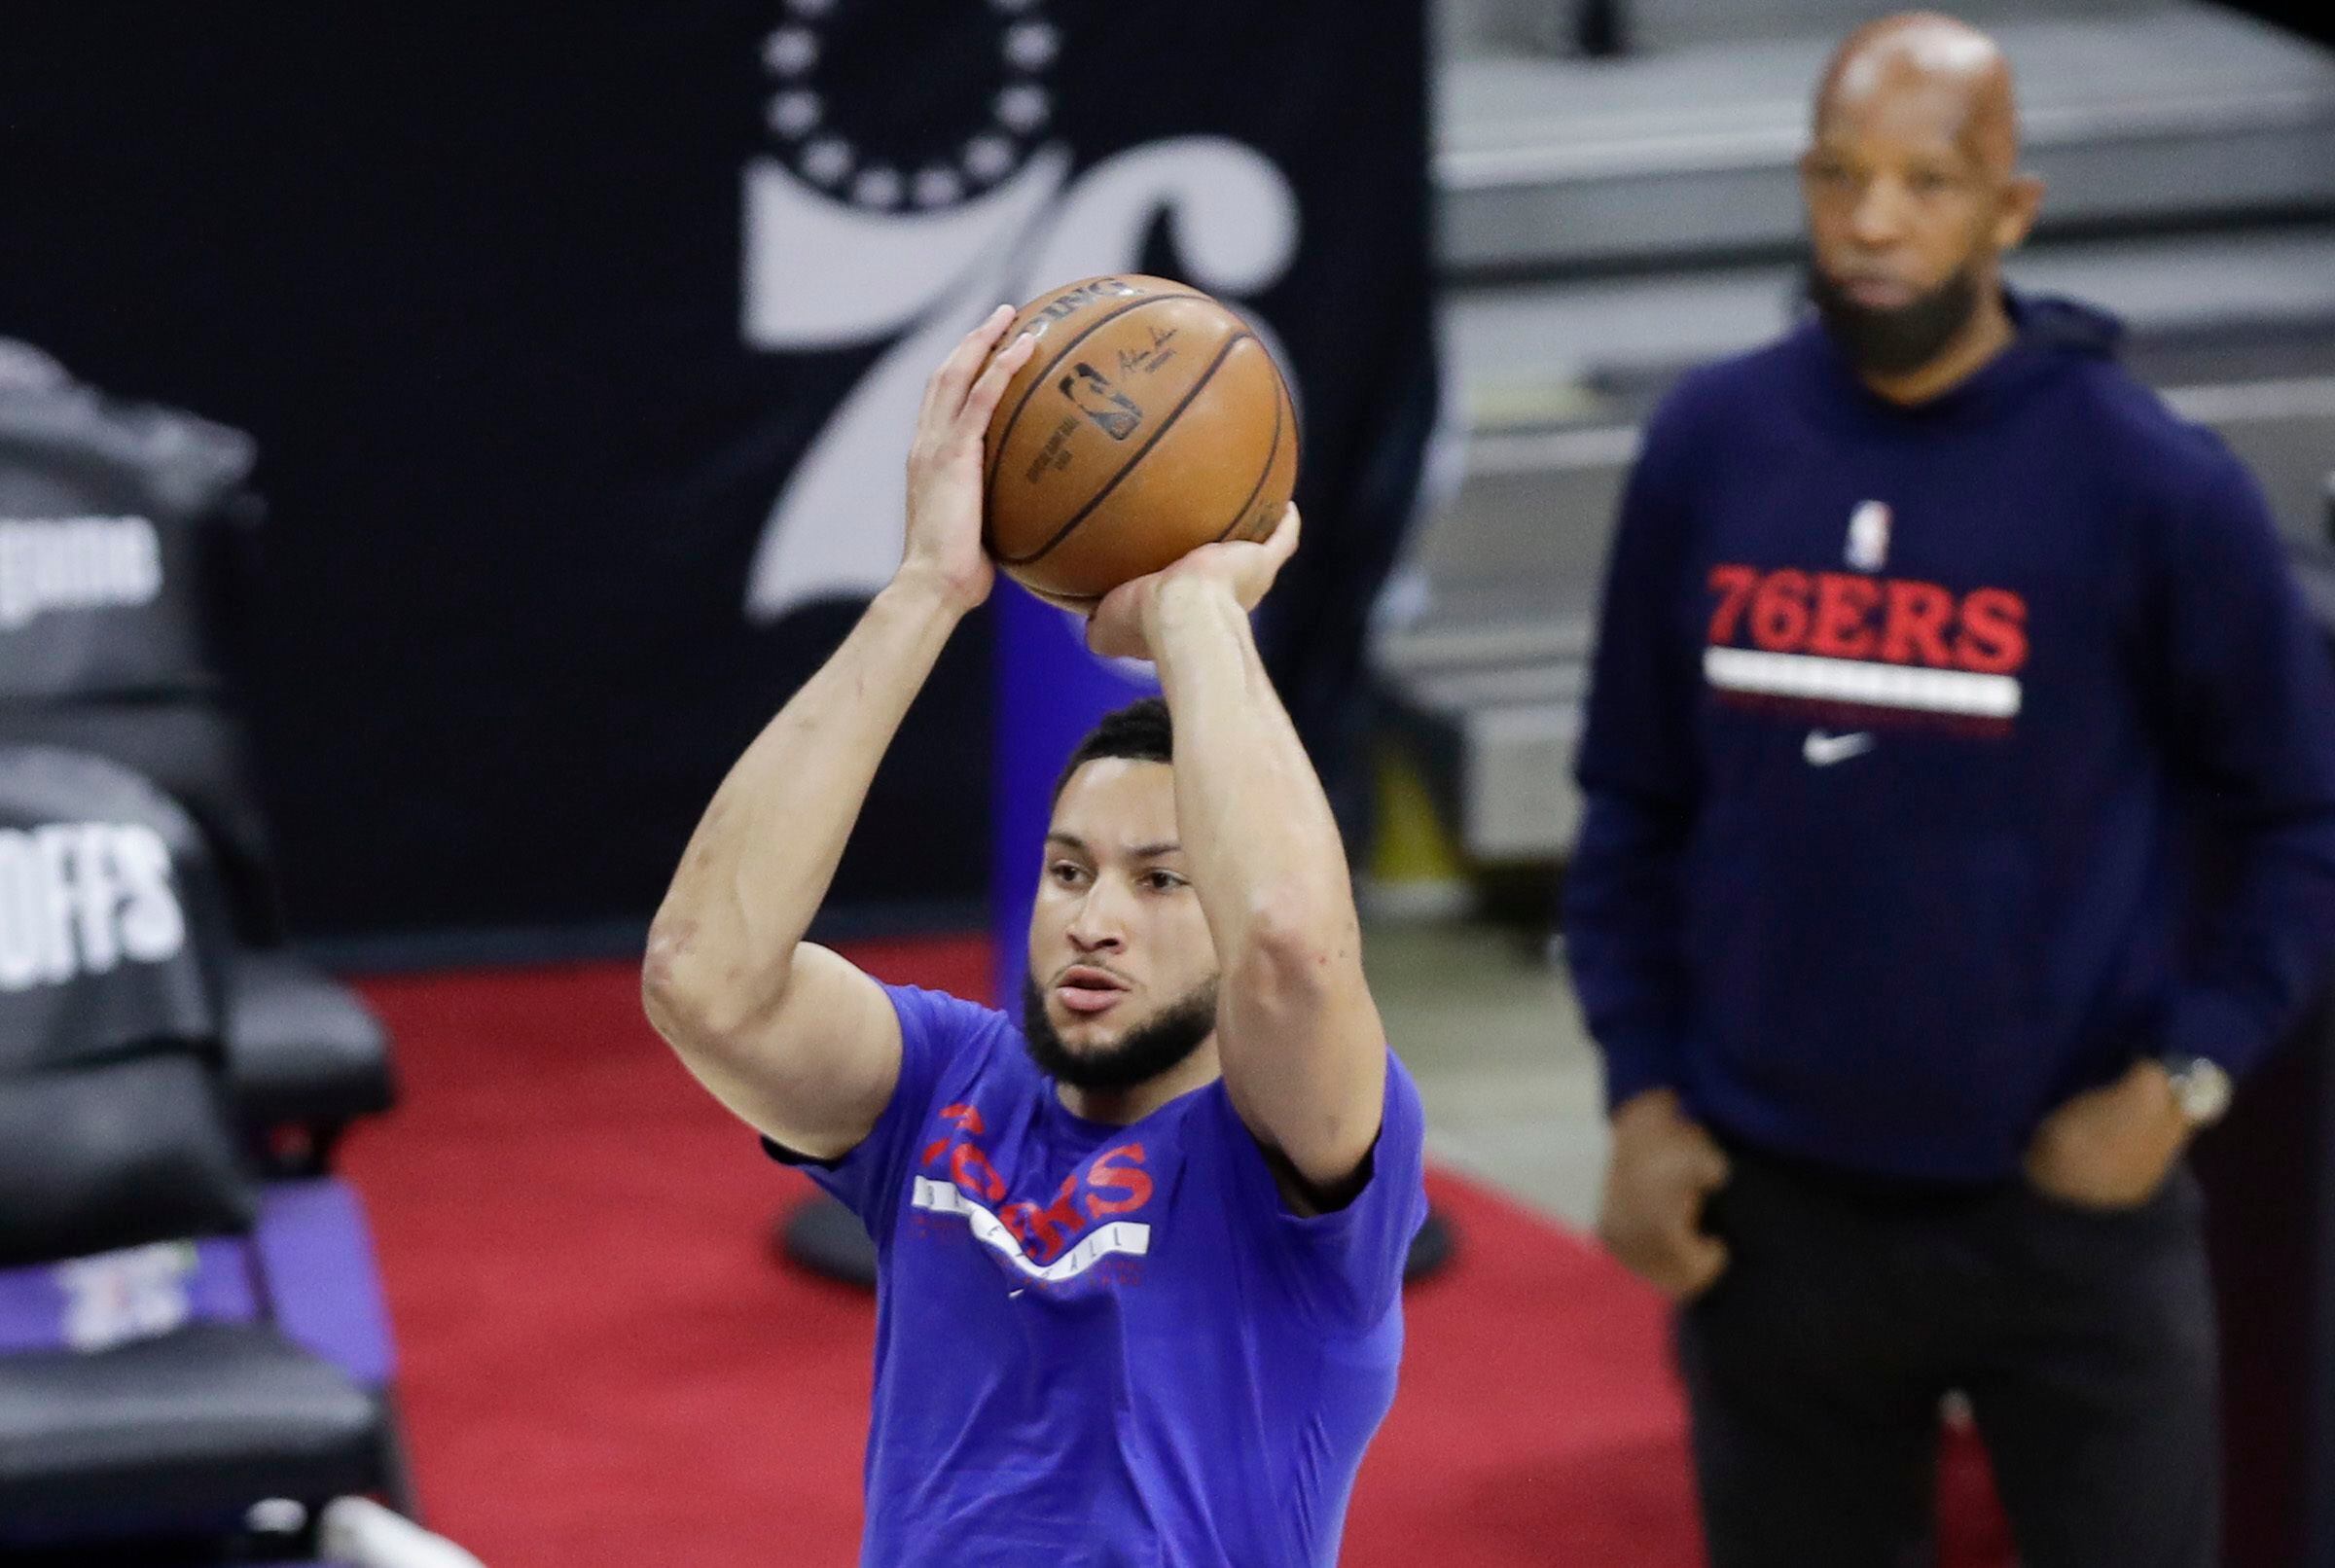 Ben Simmons, the worst shooter in the NBA, is getting $170 million